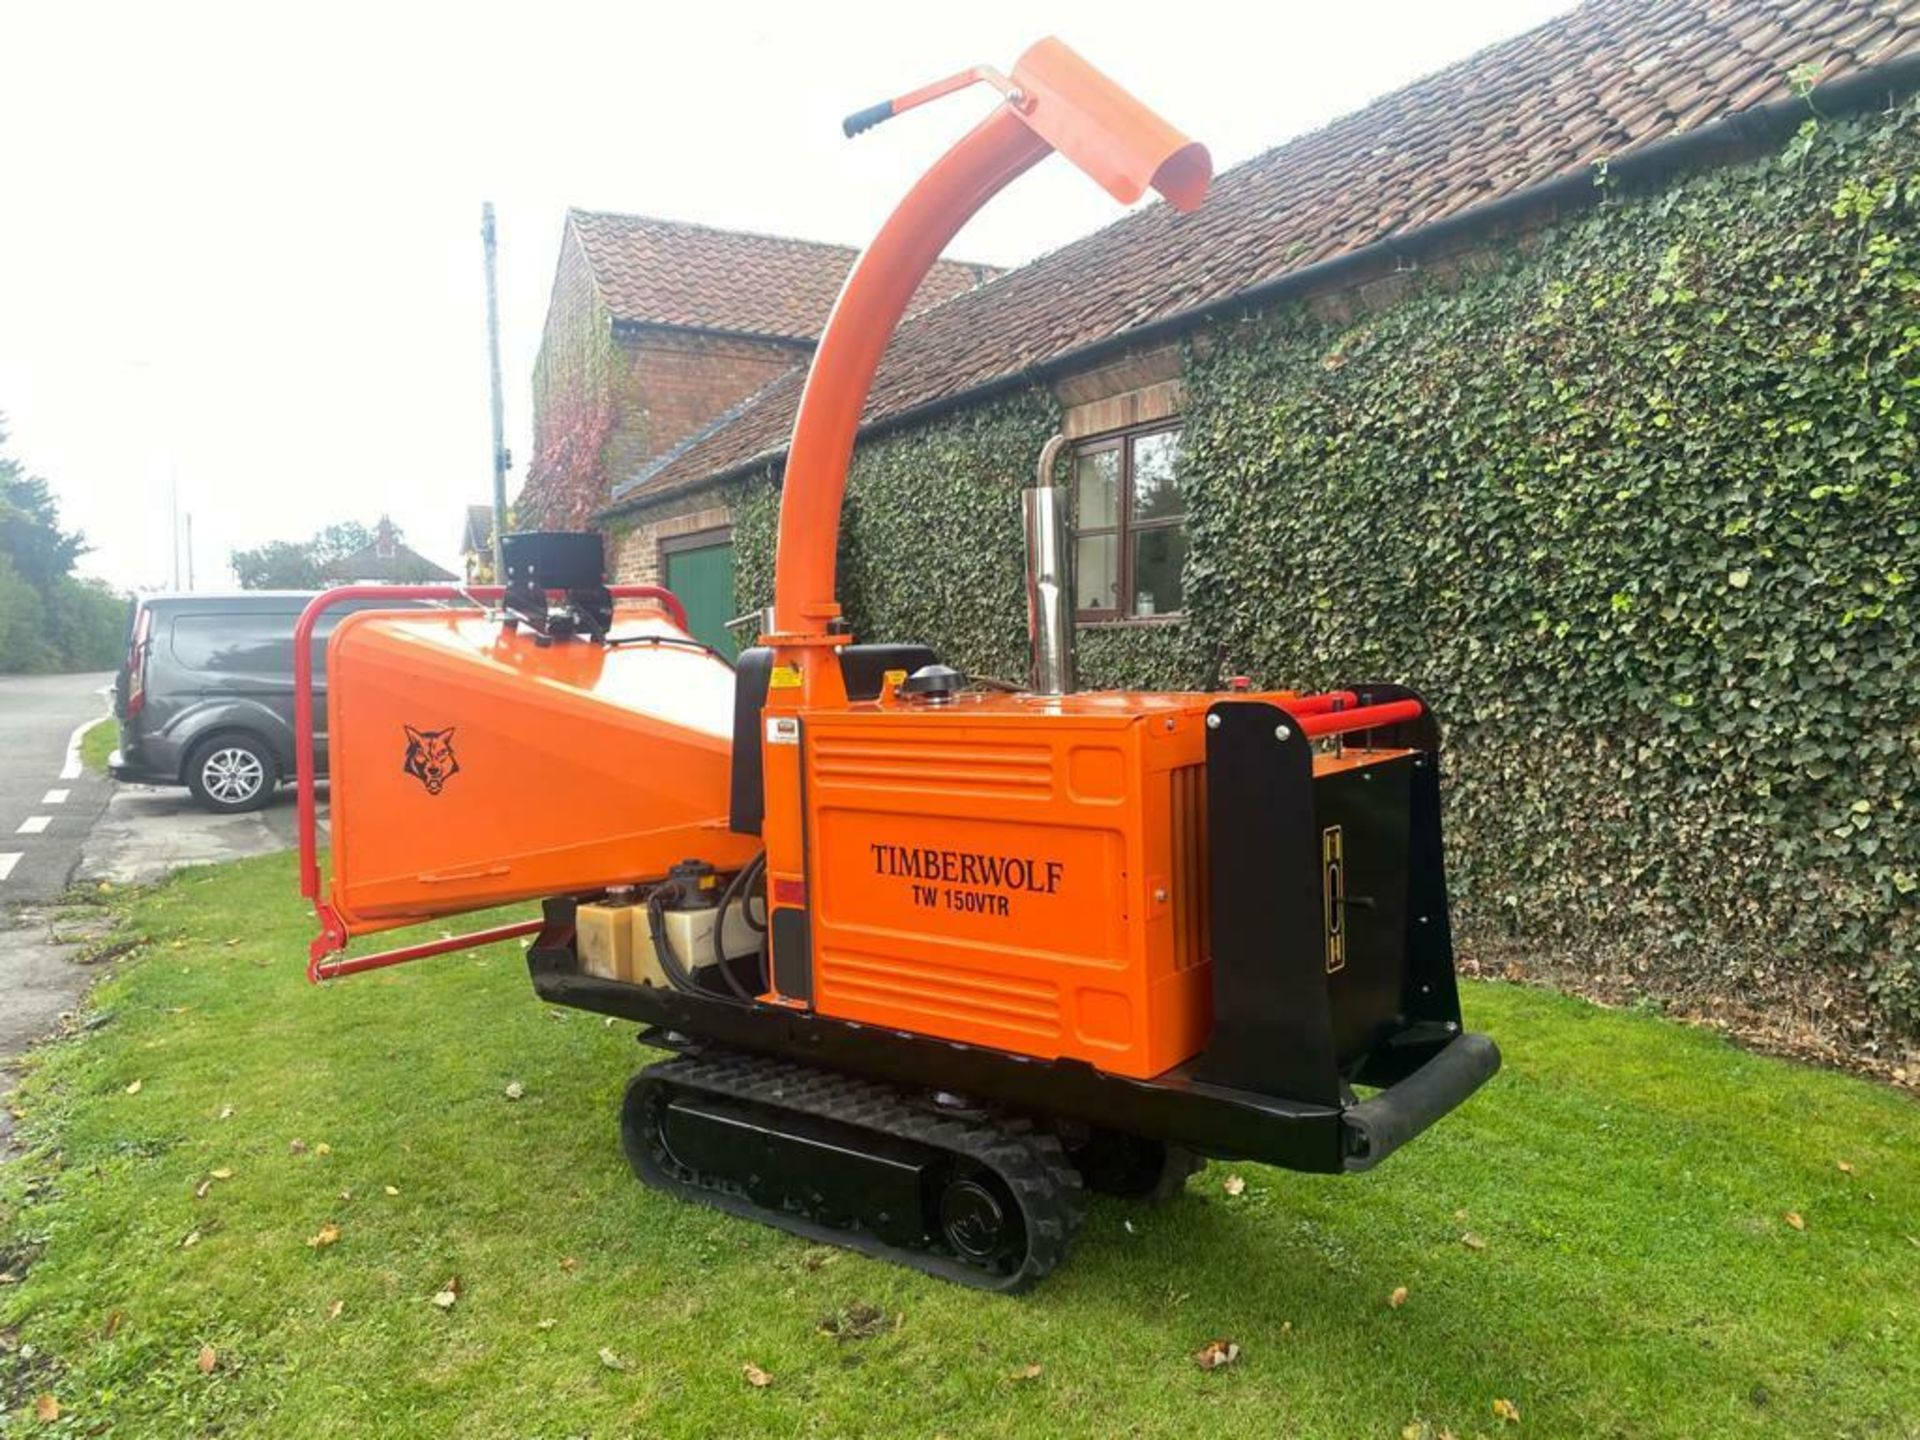 TIMBERWOLF TW 150VTR TRACKED WOOD CHIPPER, KUBOTA DIESEL ENGINE, ONLY 777 HOURS, EXPANDING TRACKS - Image 8 of 12